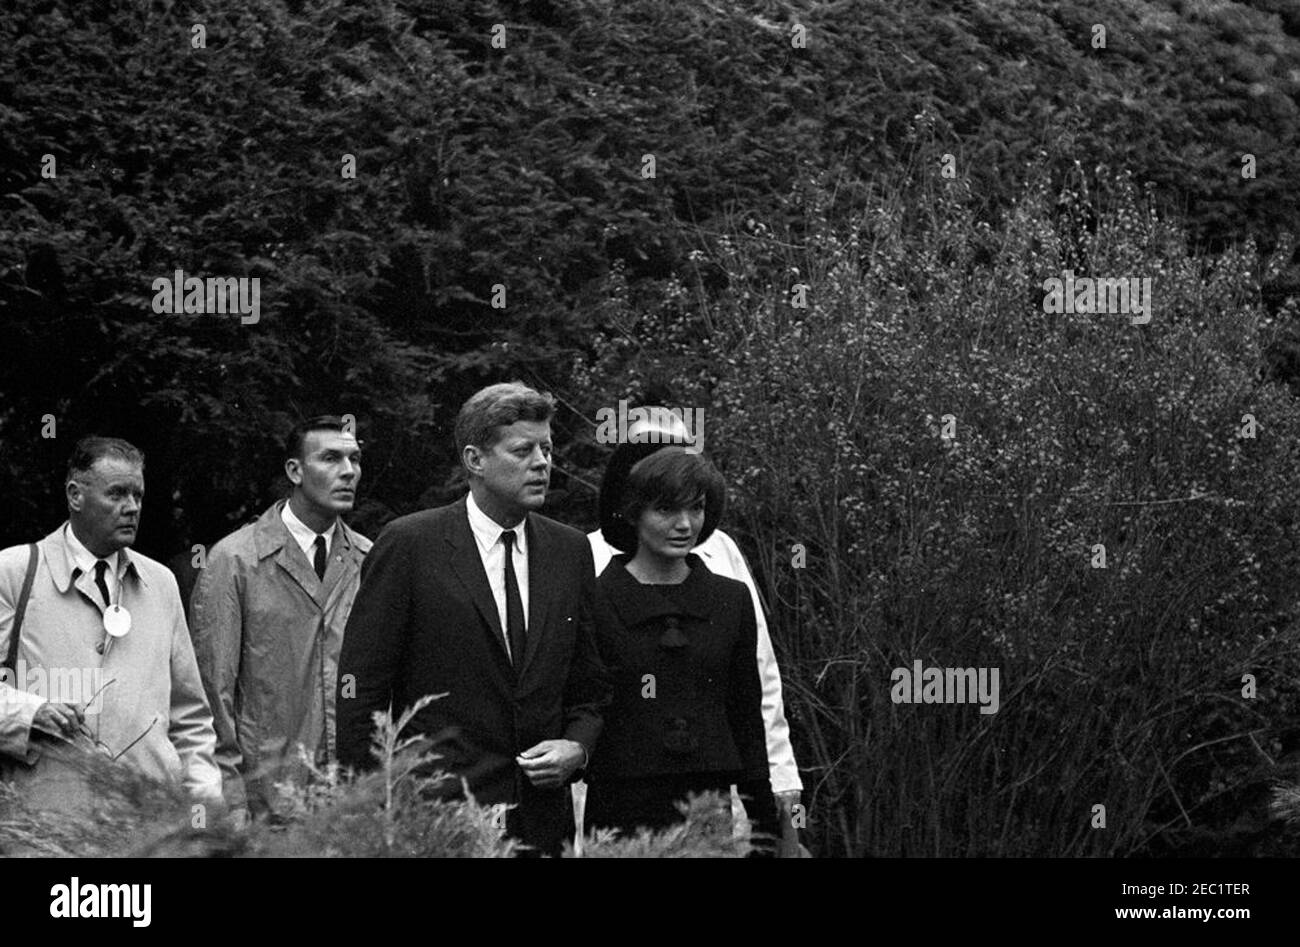 Funeral services for Mrs. Eleanor Roosevelt, Hyde Park, New York. President John F. Kennedy and First Lady Jacqueline Kennedy attend the funeral of Eleanor Roosevelt in the rose garden on the Roosevelt estate in Hyde Park, New York. Newsreel photographer for United Press Movietone, Thomas J. Craven, Sr., and White House Secret Service agent, Bob Lilley, walk at left. Stock Photo